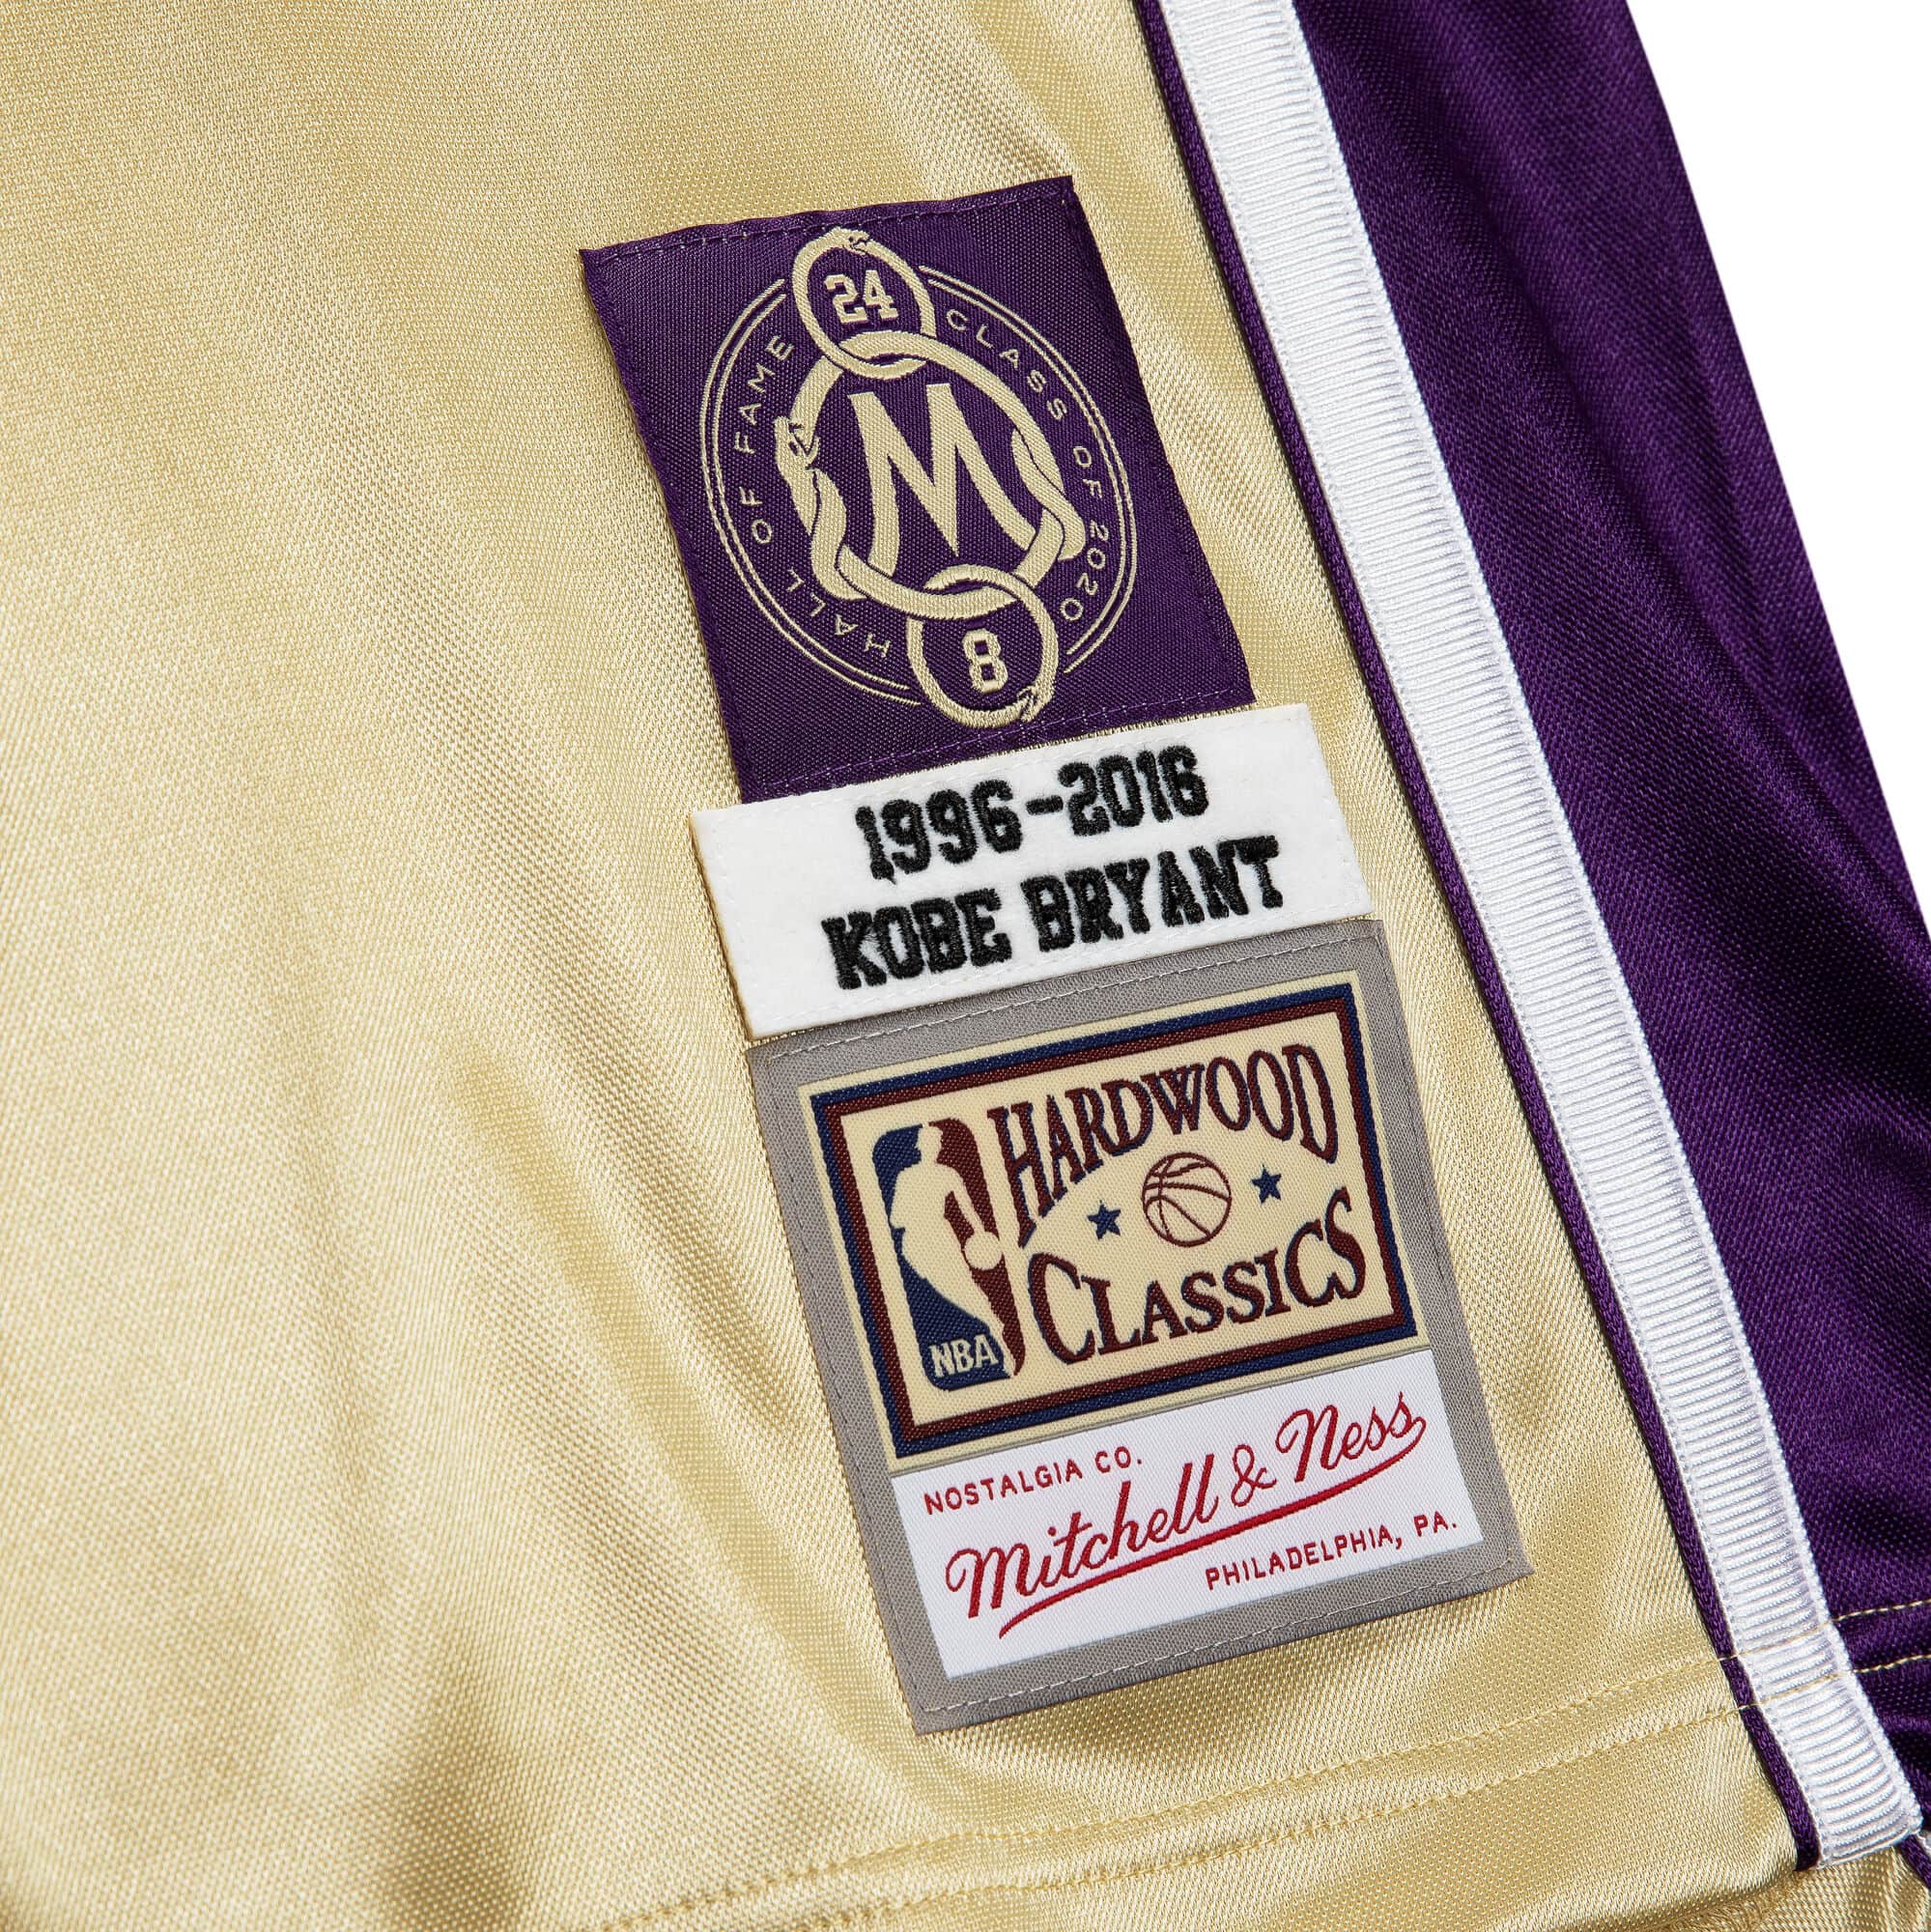 Mitchell & Ness Authentic Hof #24 Kobe Bryant Lakers Jersey – DTLR